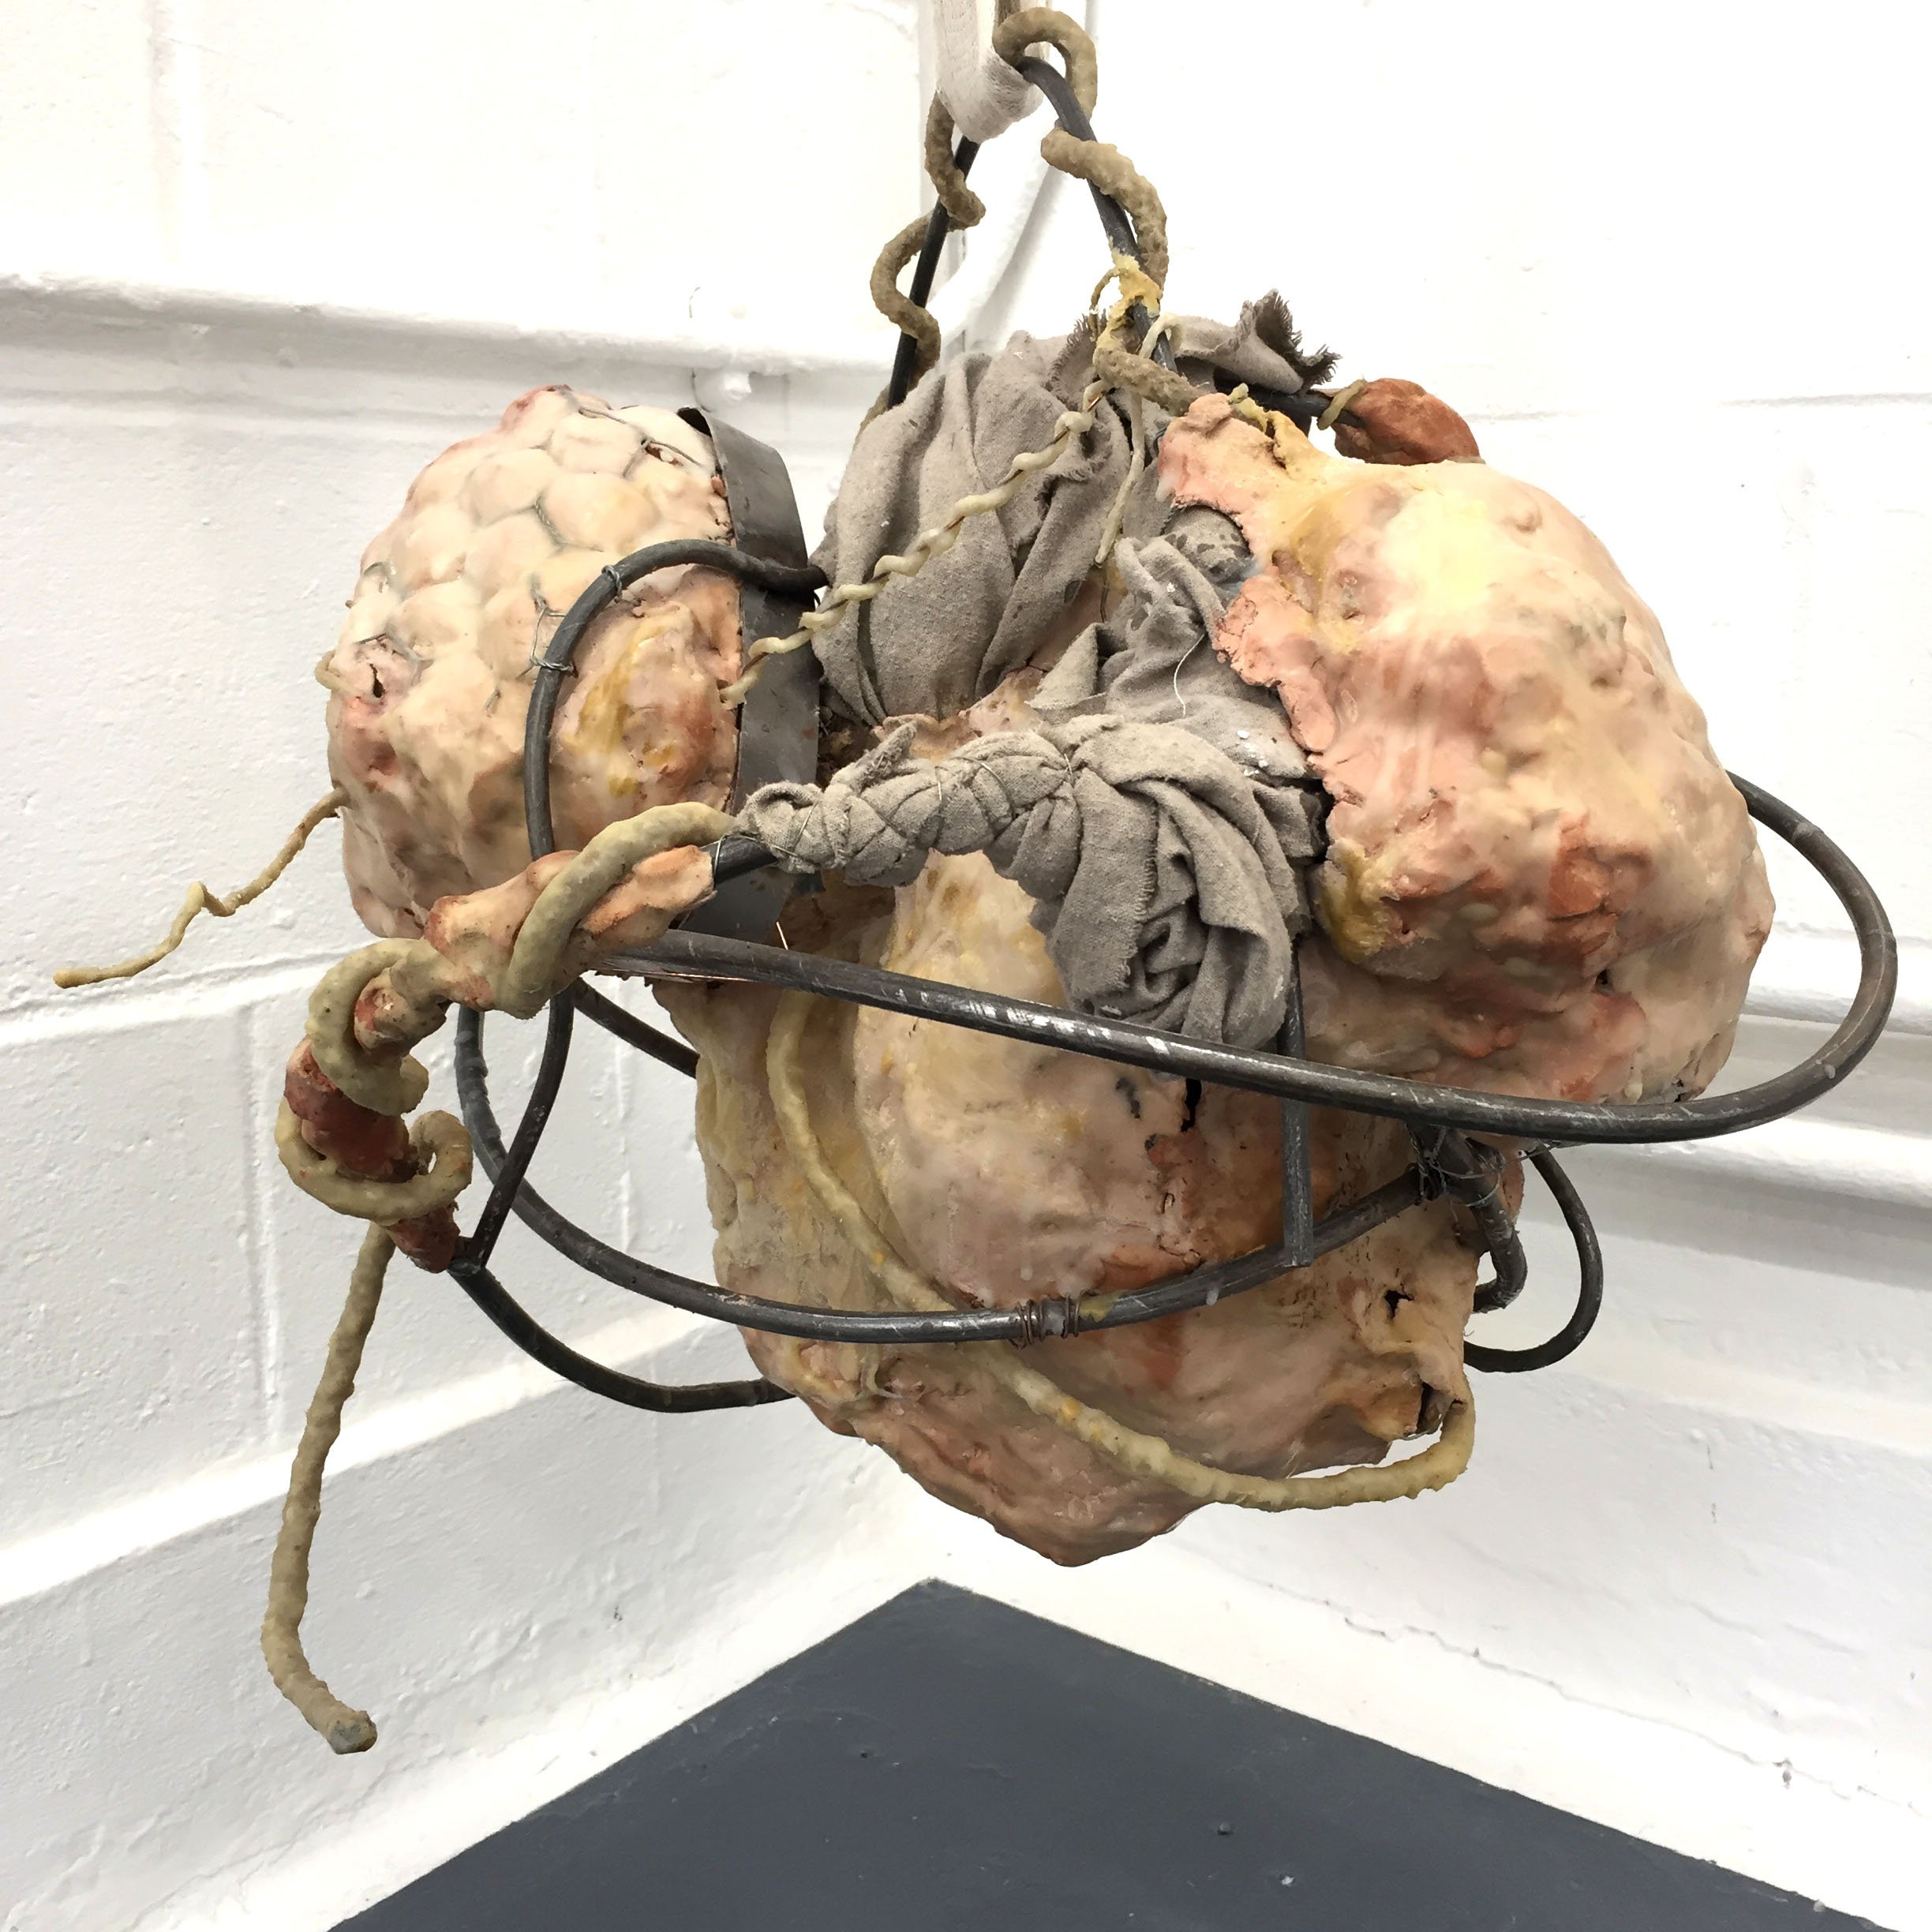   Fully in Bloom,  2018, Steel frame, air dry clay, wax, fabric.  